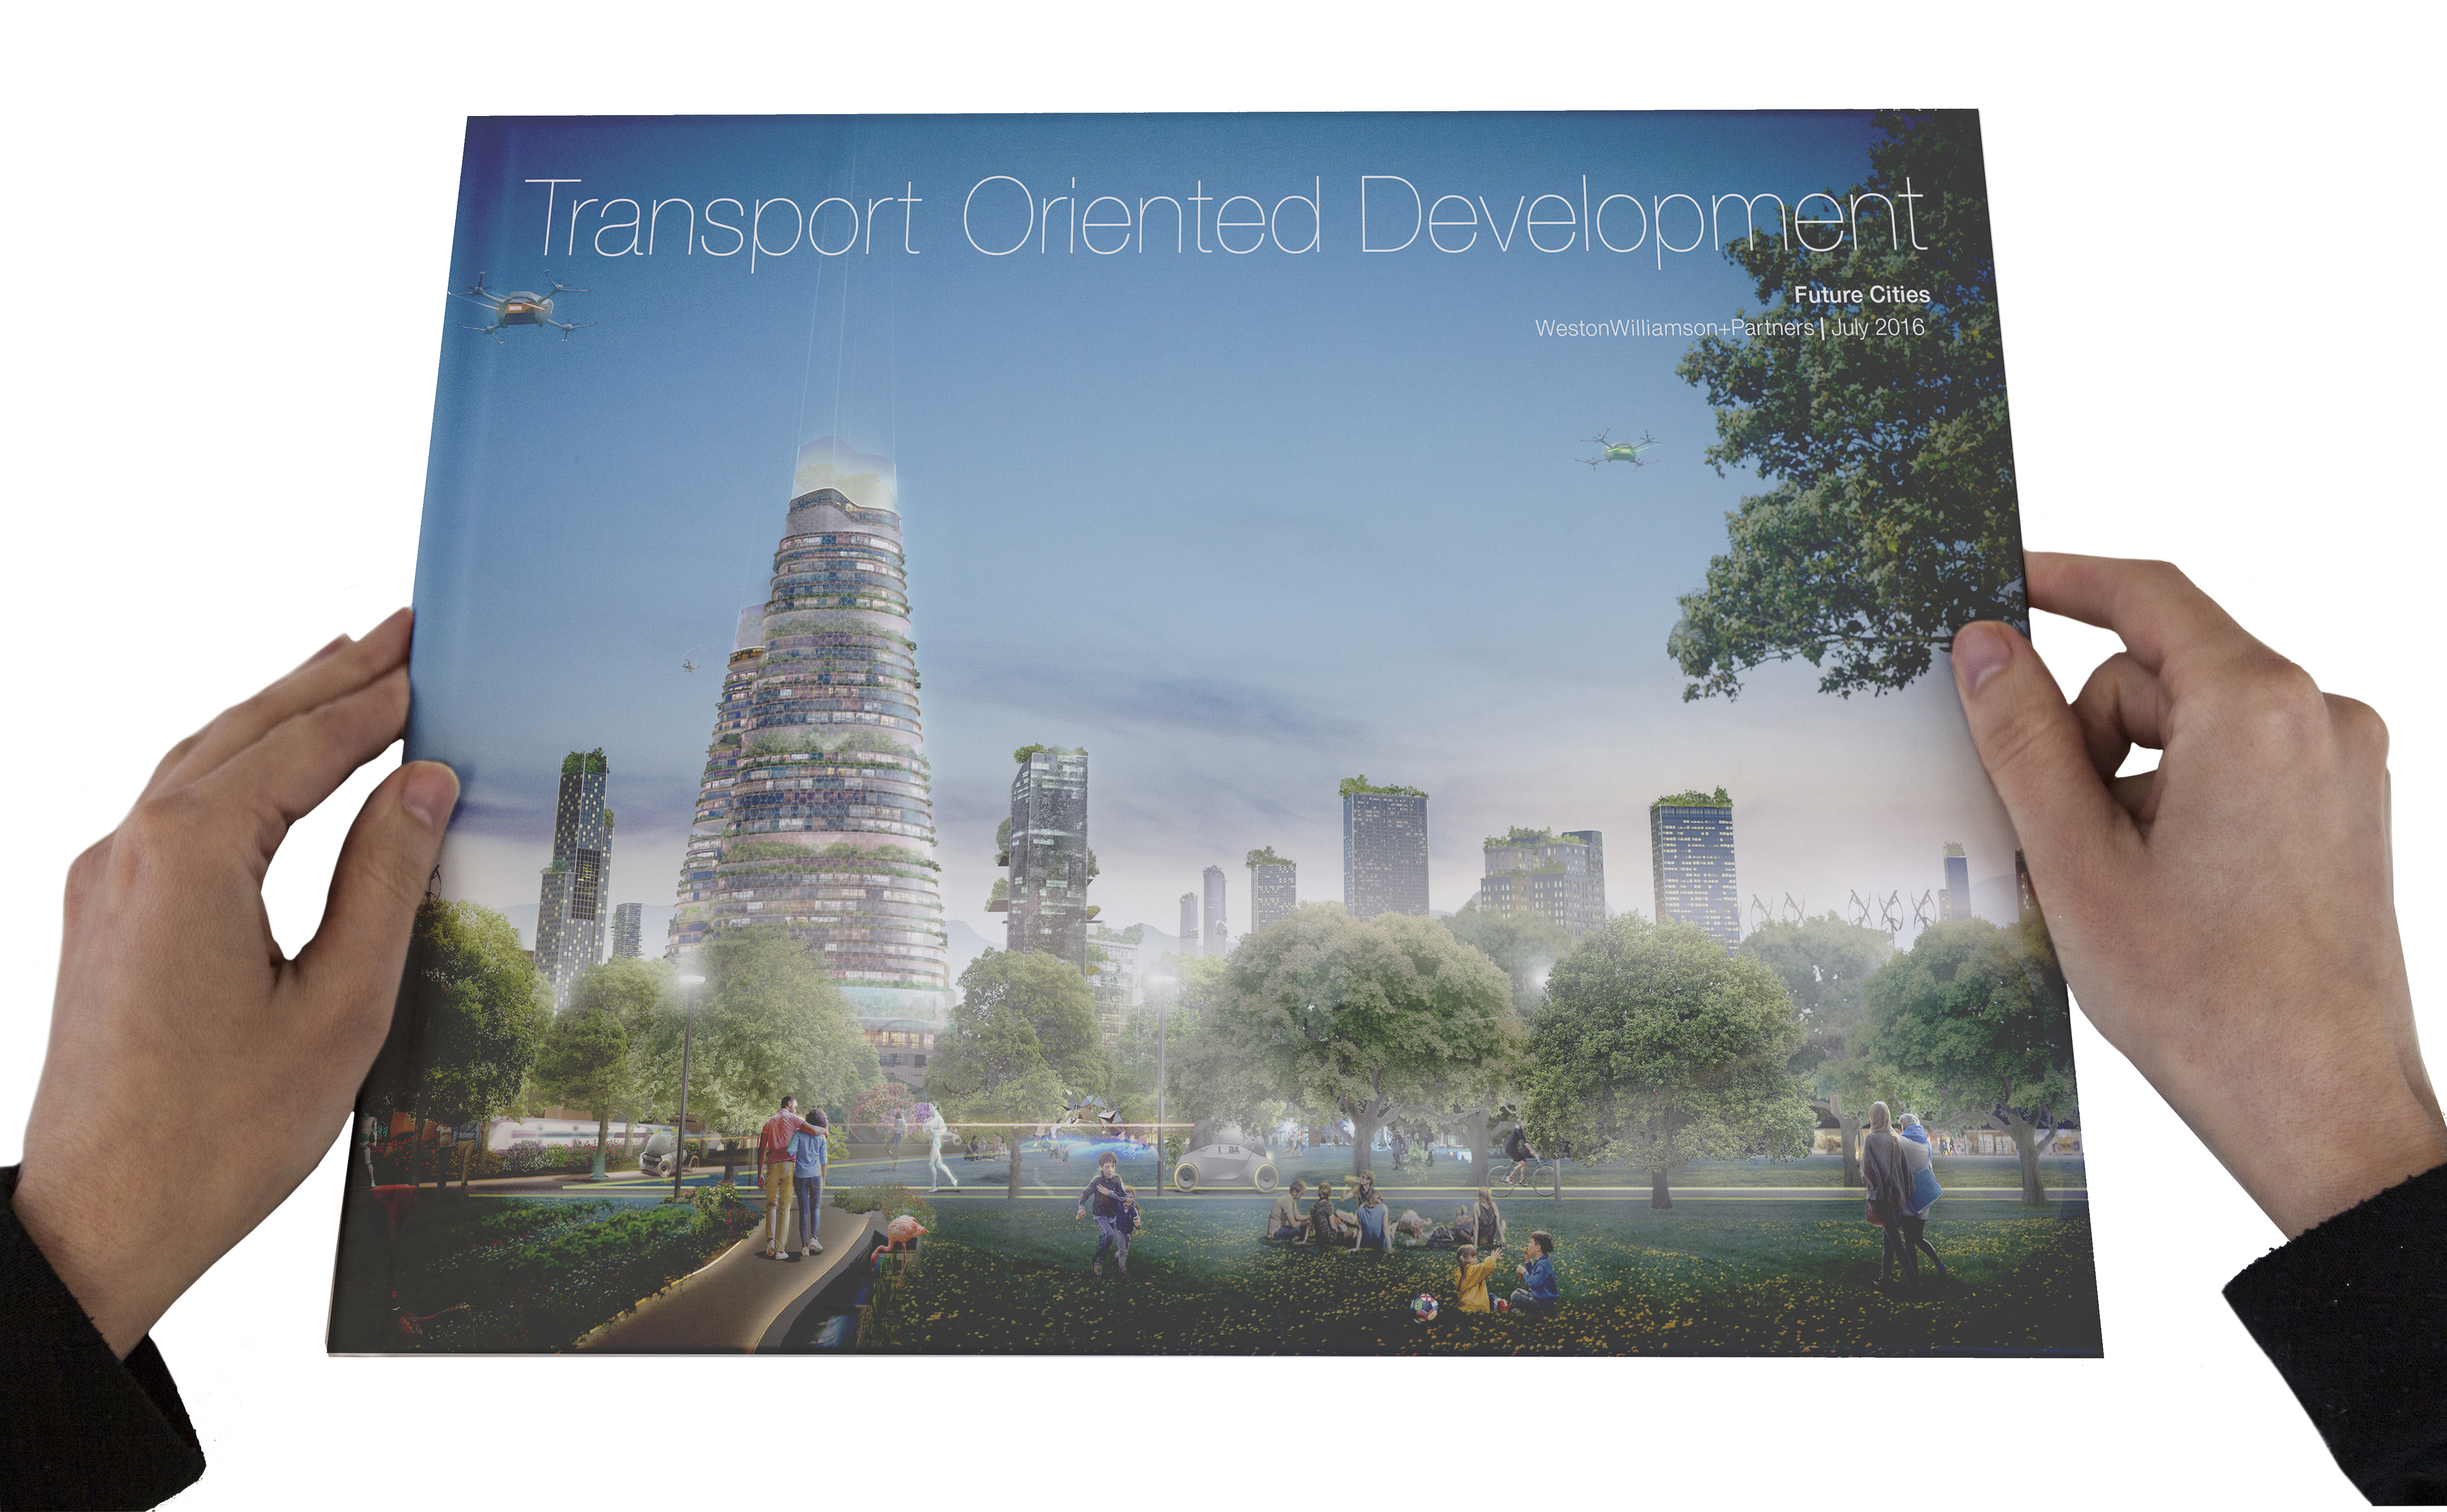 Transport-Oriented-Development-by-WWP-cover-no-background.jpg#asset:4749